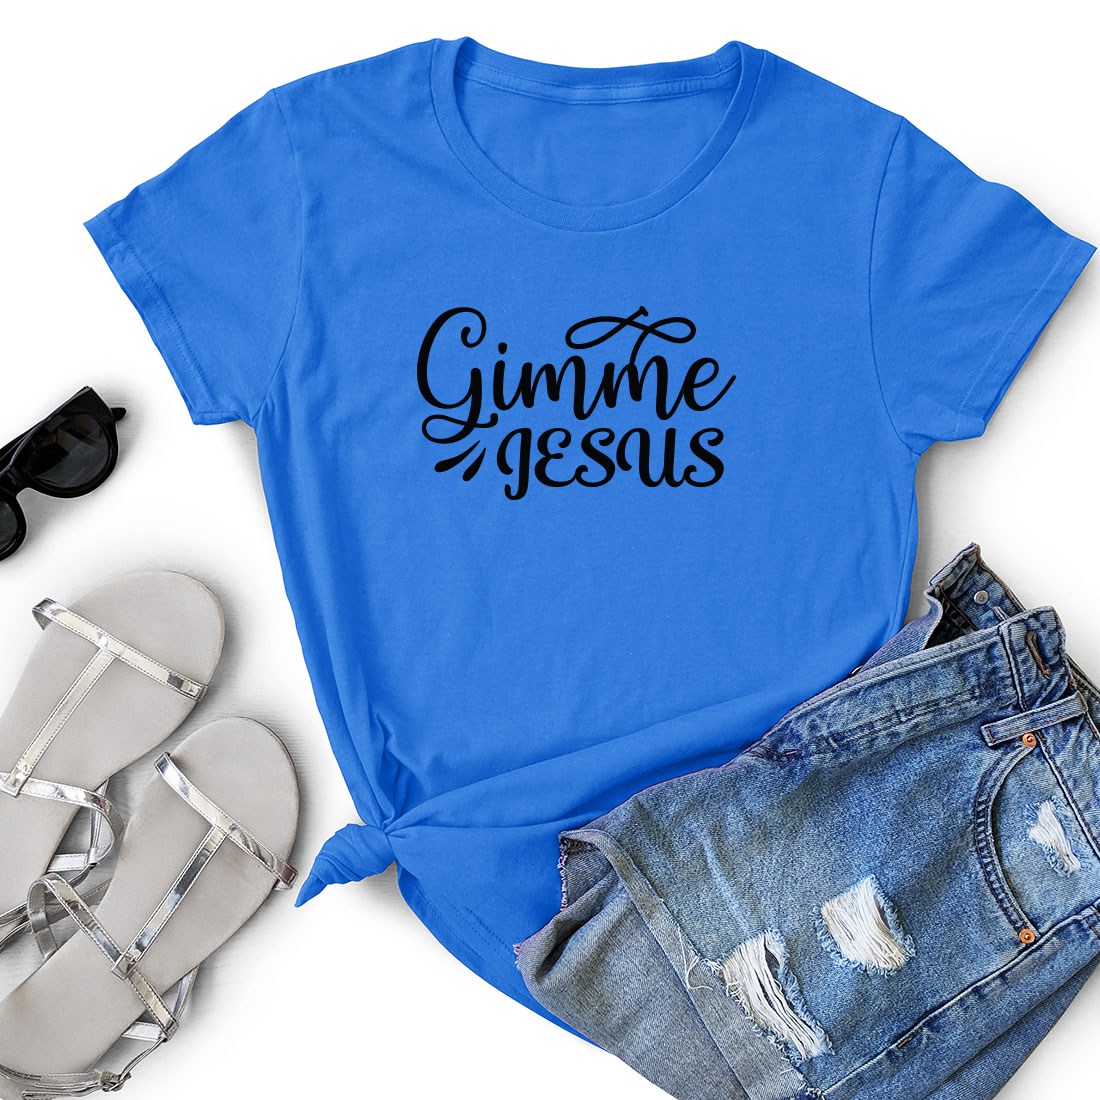 T - shirt that says gimme jesus next to a pair of shorts.